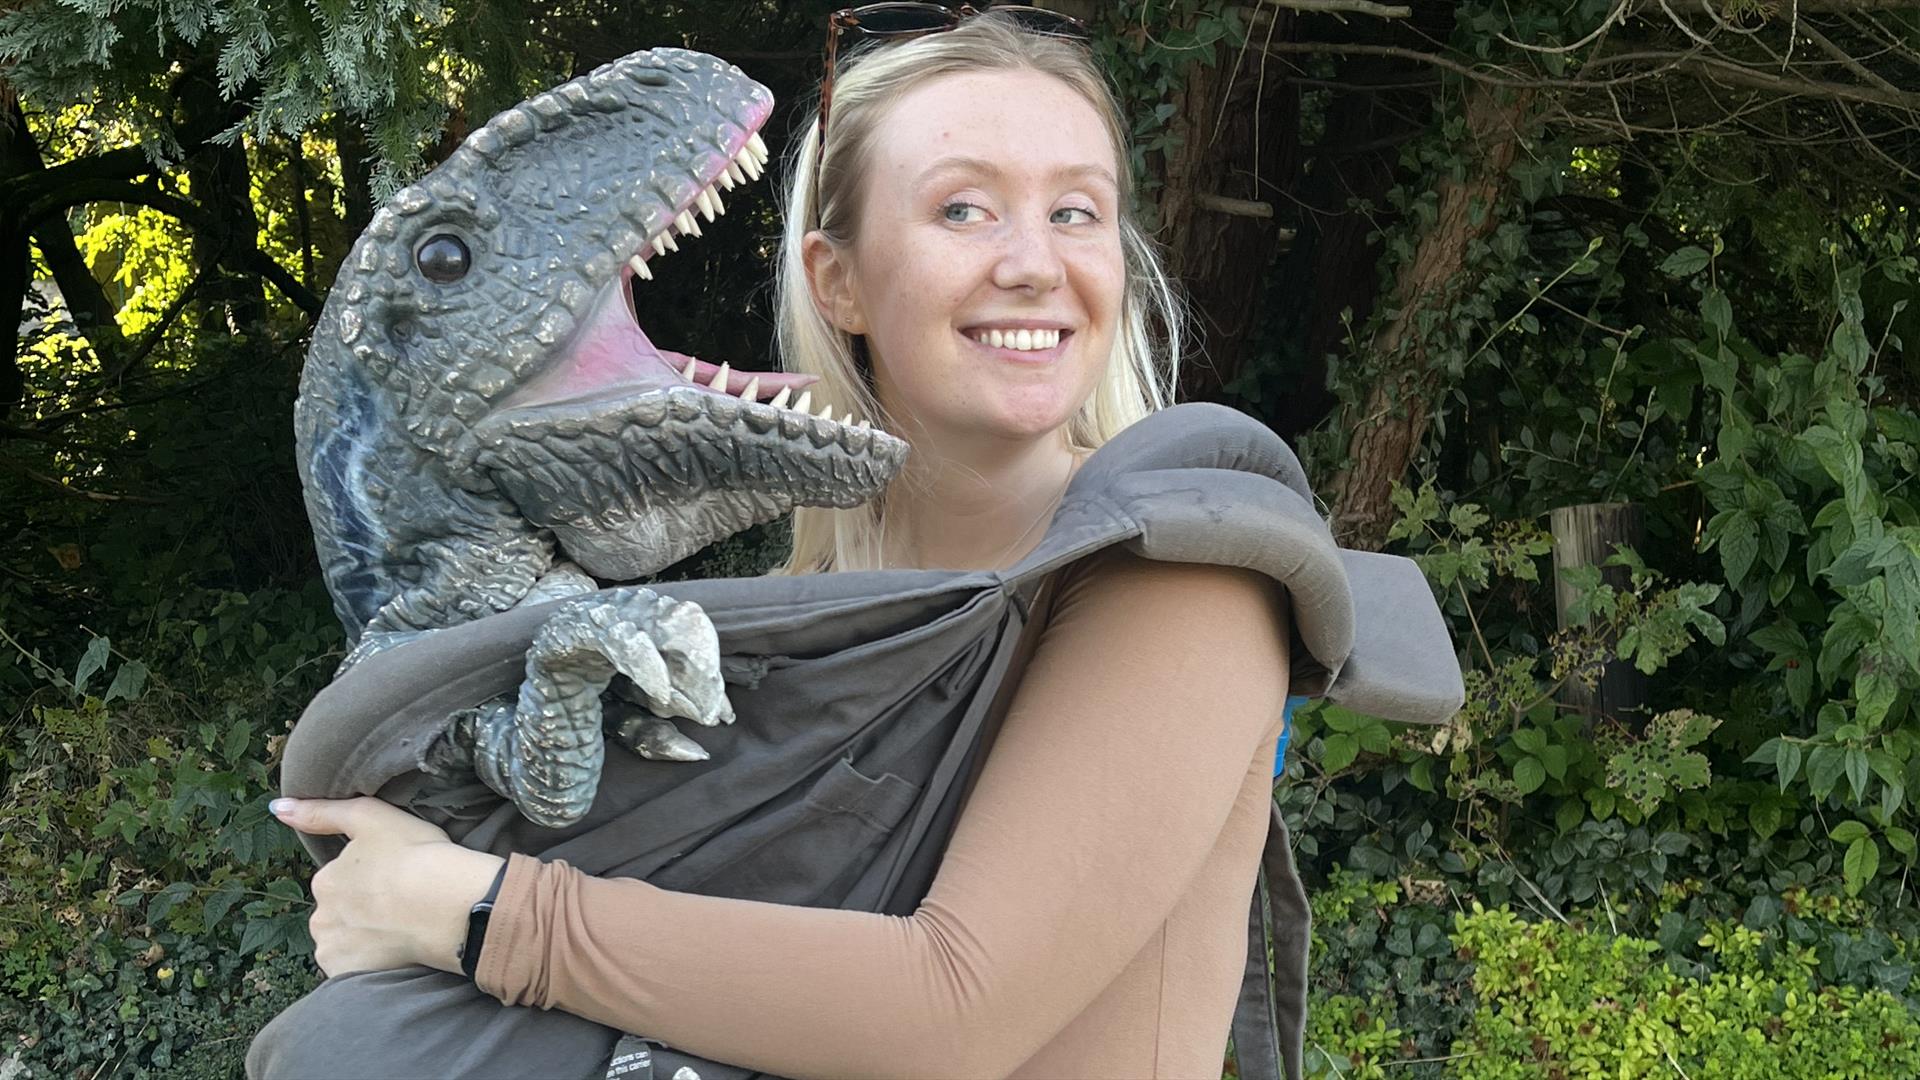 A dino being cuddled in a sling